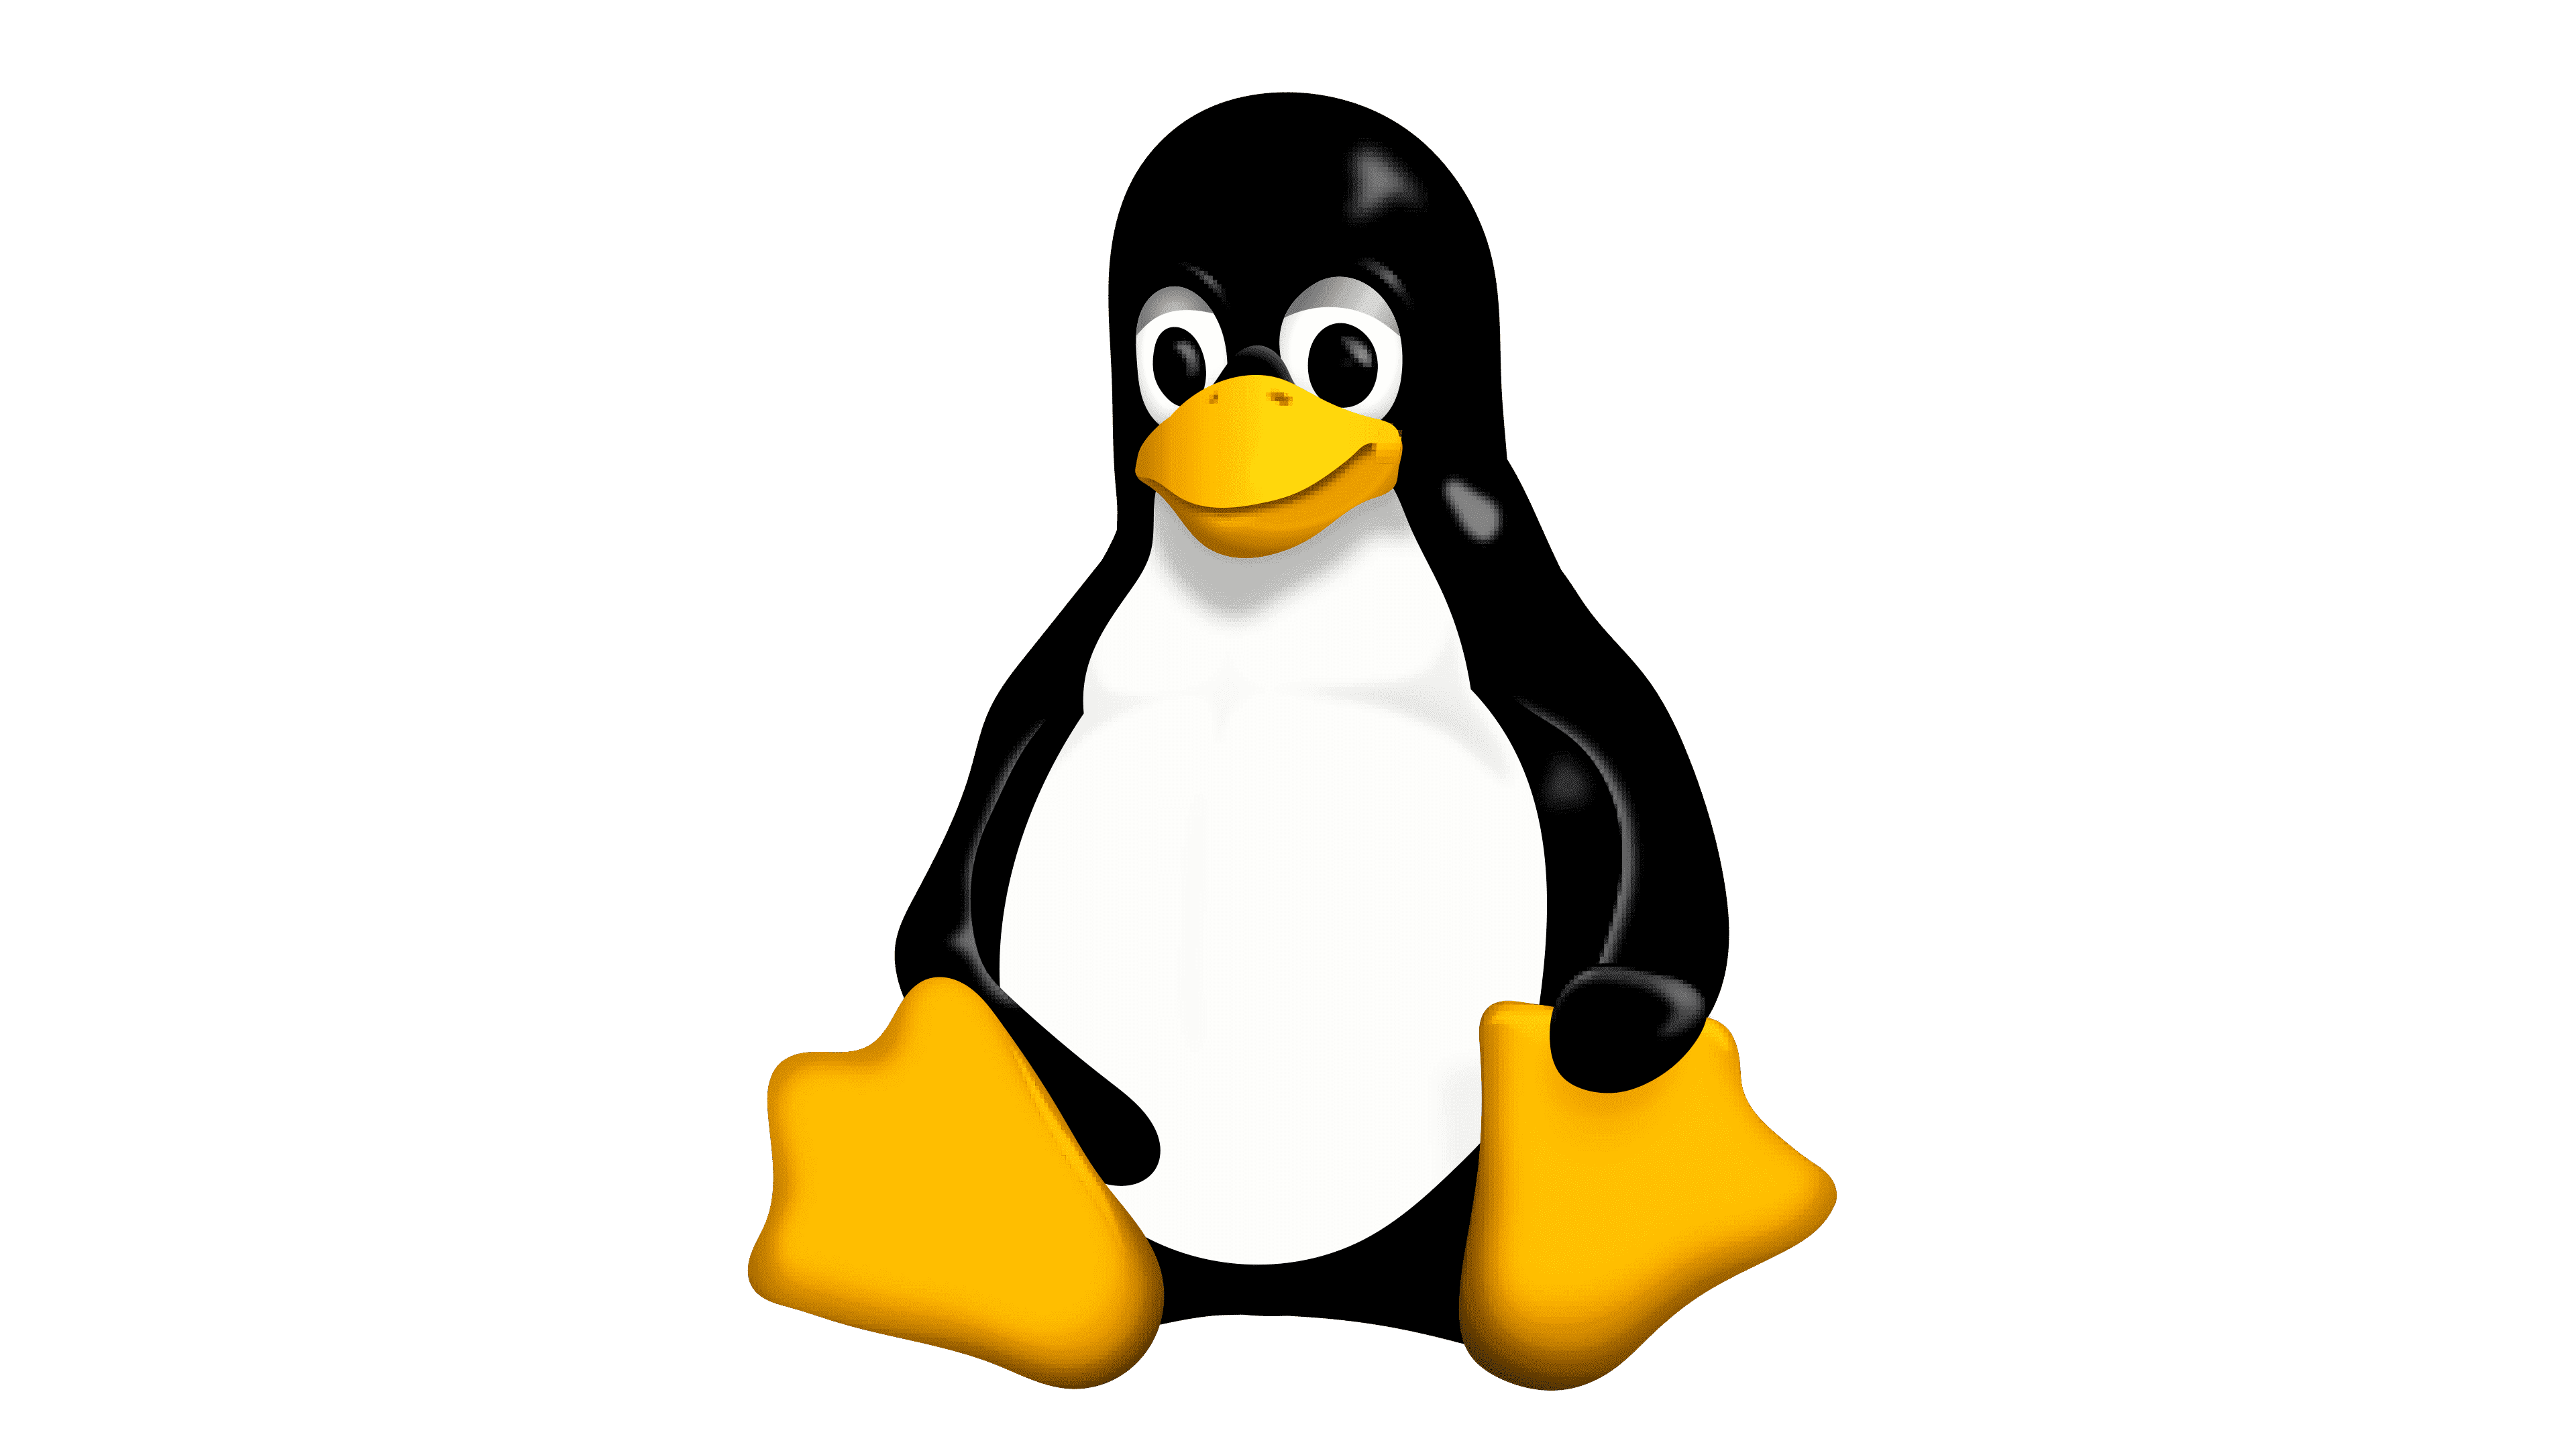 Linux OS: The Open-Source Operating System for Power Users